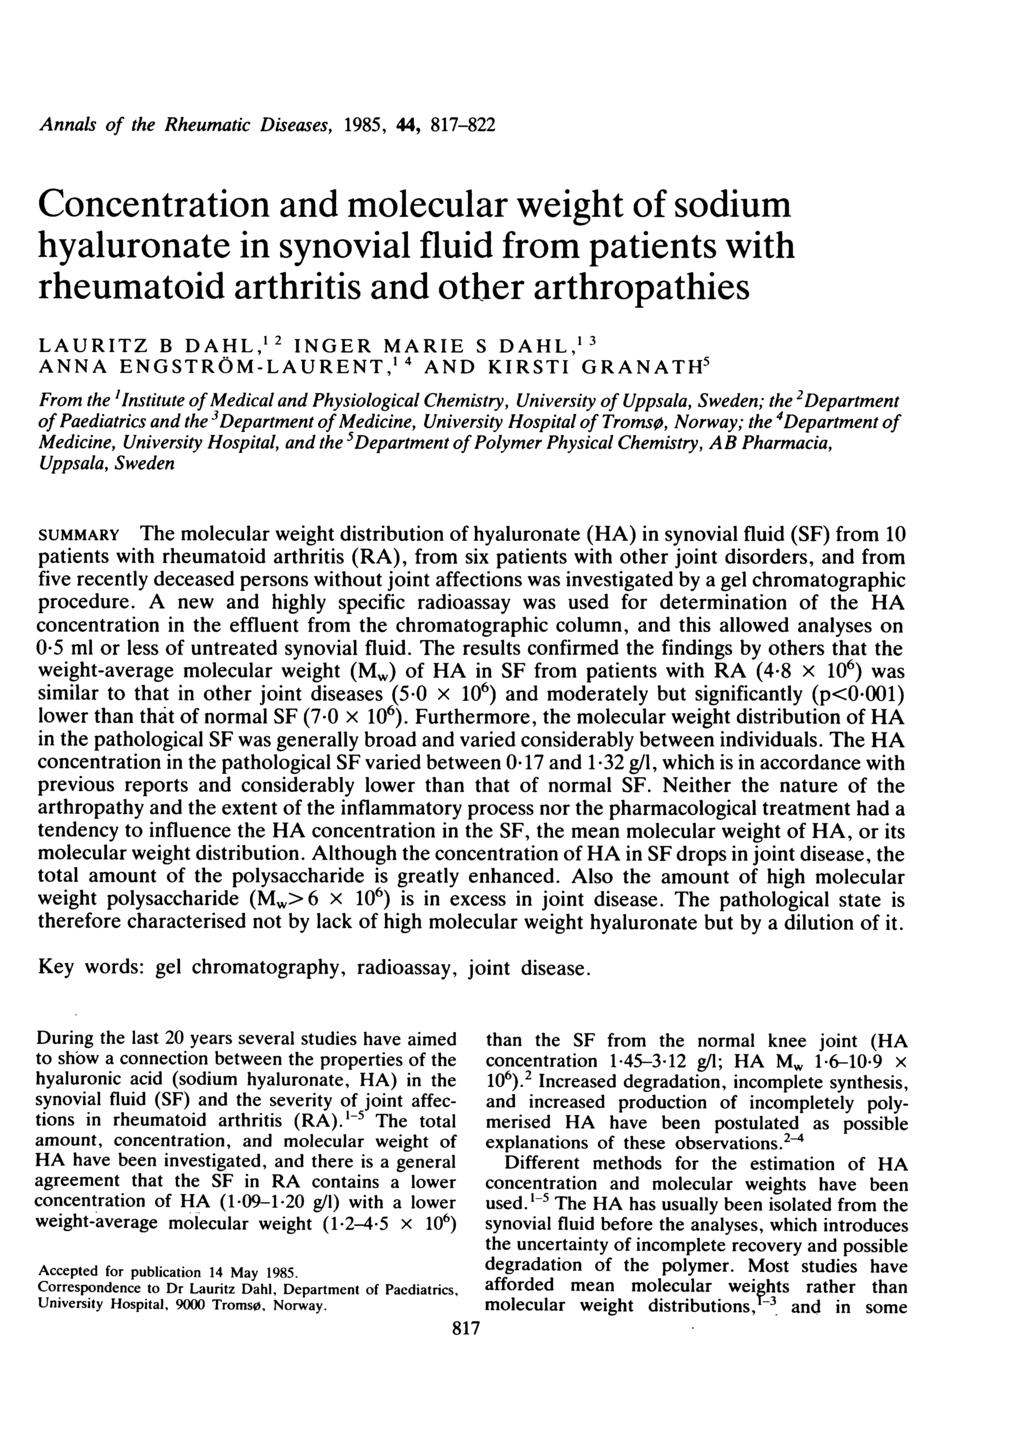 Annals of the Rheumatic Diseases, 1985, 44, 817-822 Concentration and molecular weight of sodium hyaluronate in synovial fluid from patients with rheumatoid arthritis and other arthropathies LAURITZ